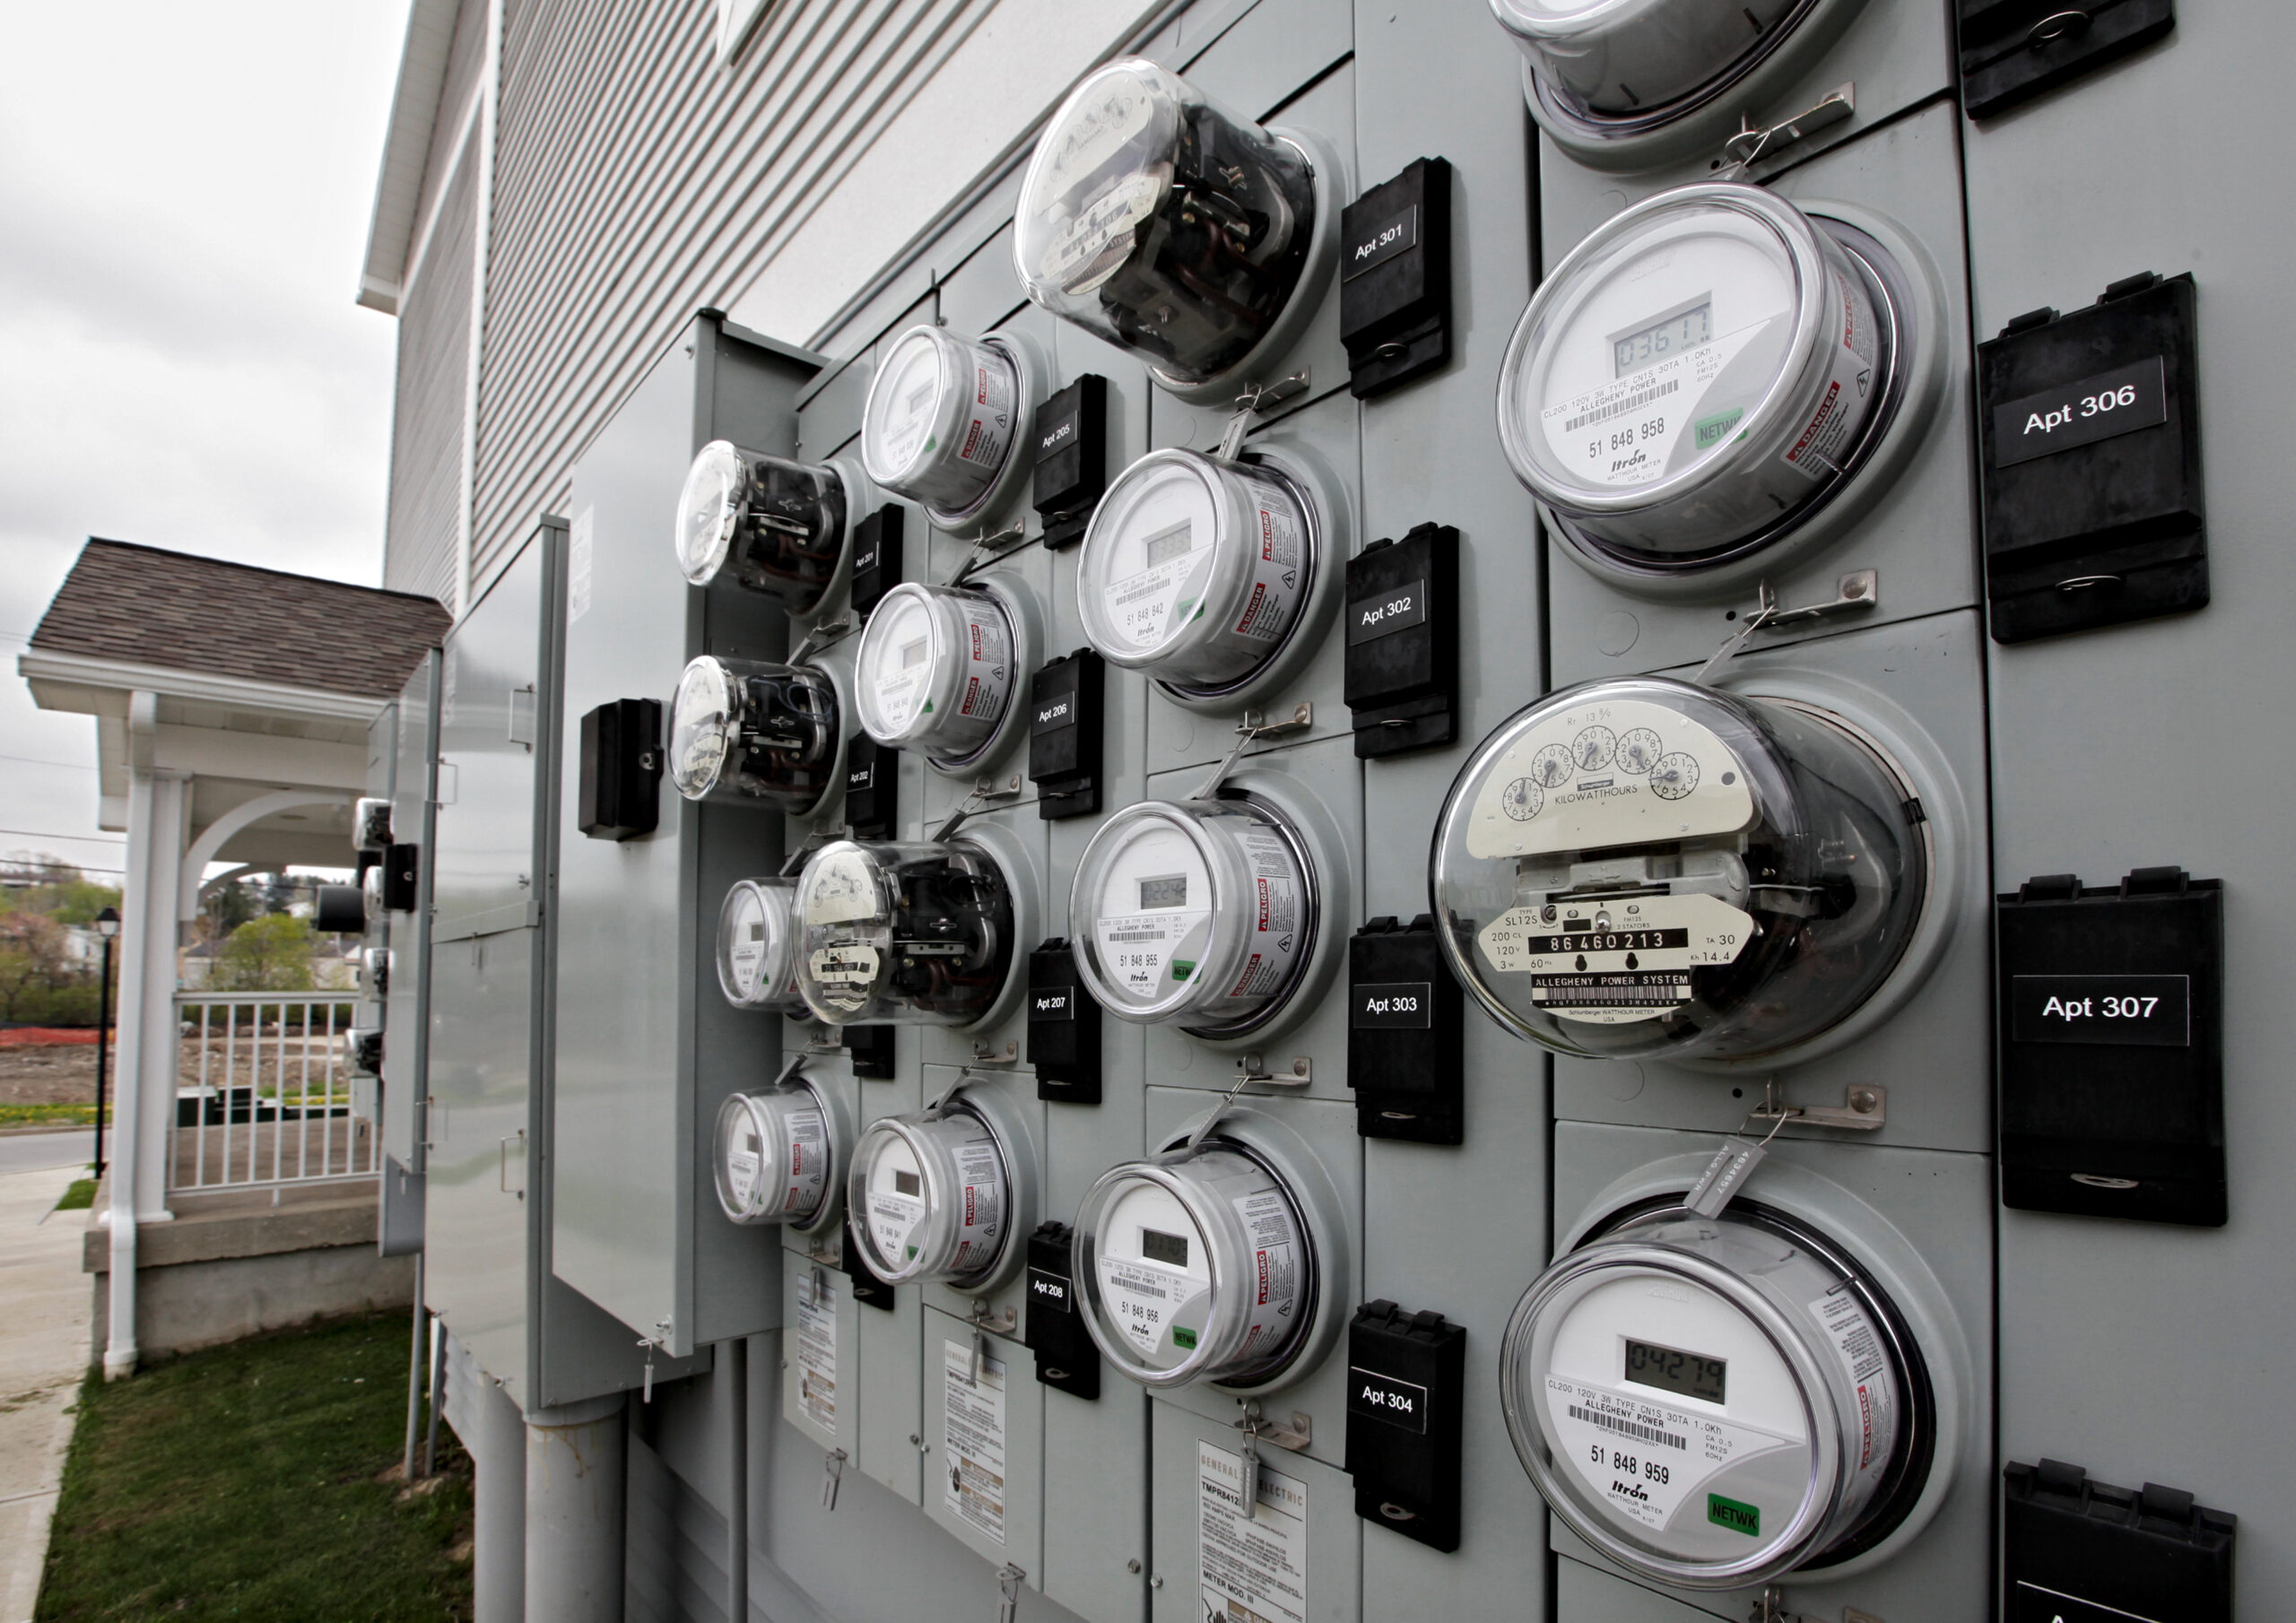 Watt-hour meters track electricity used by residents of an apartment building.